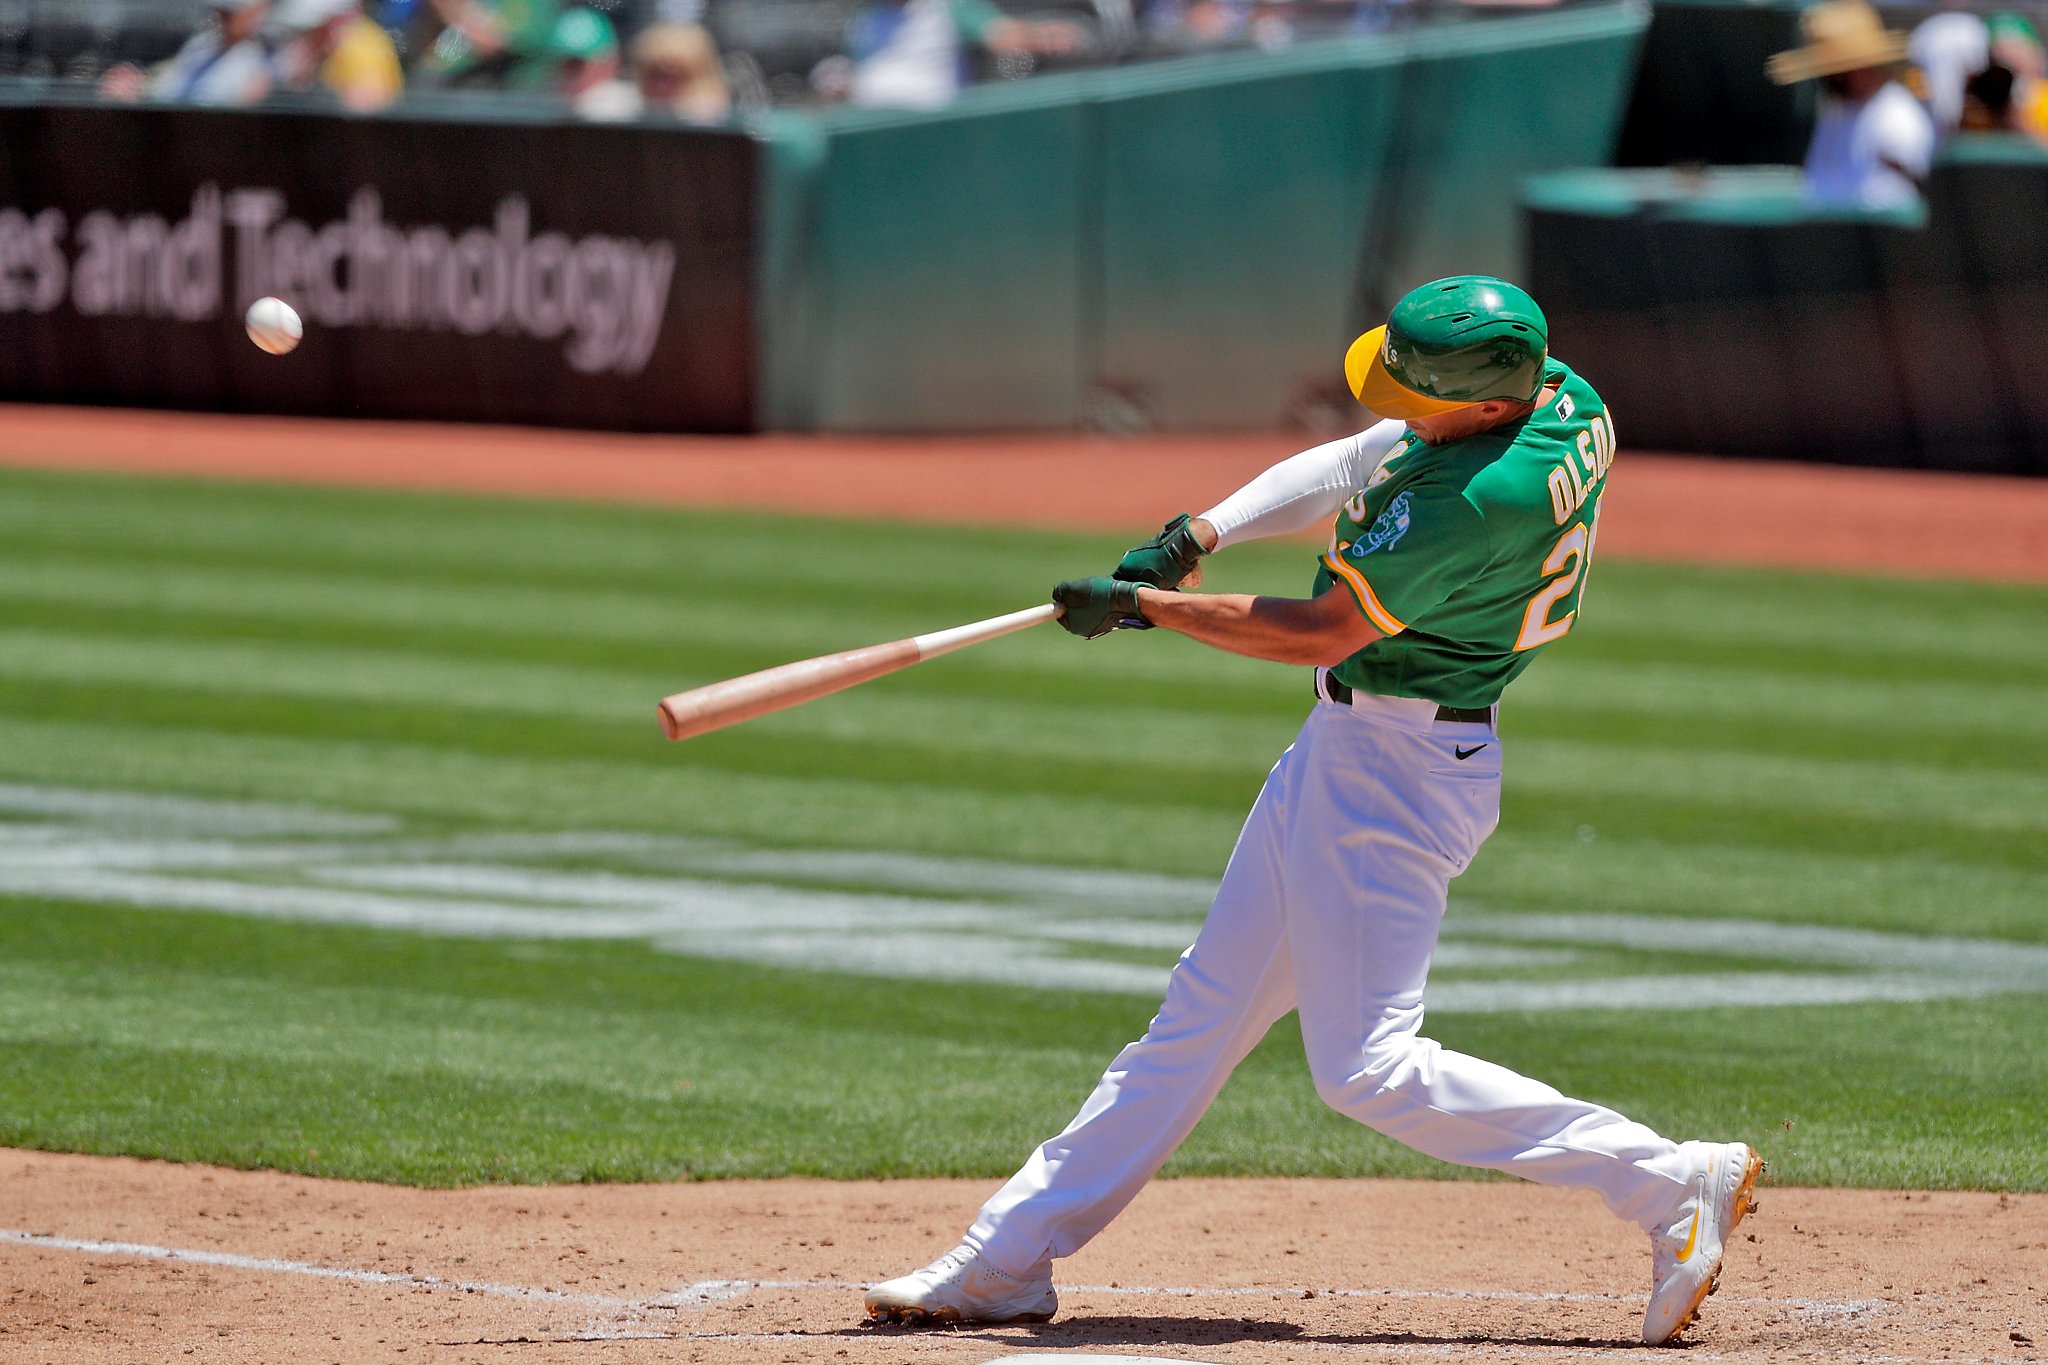 A's Matt Olson says Home Run Derby is 'something I'd be open to' if asked